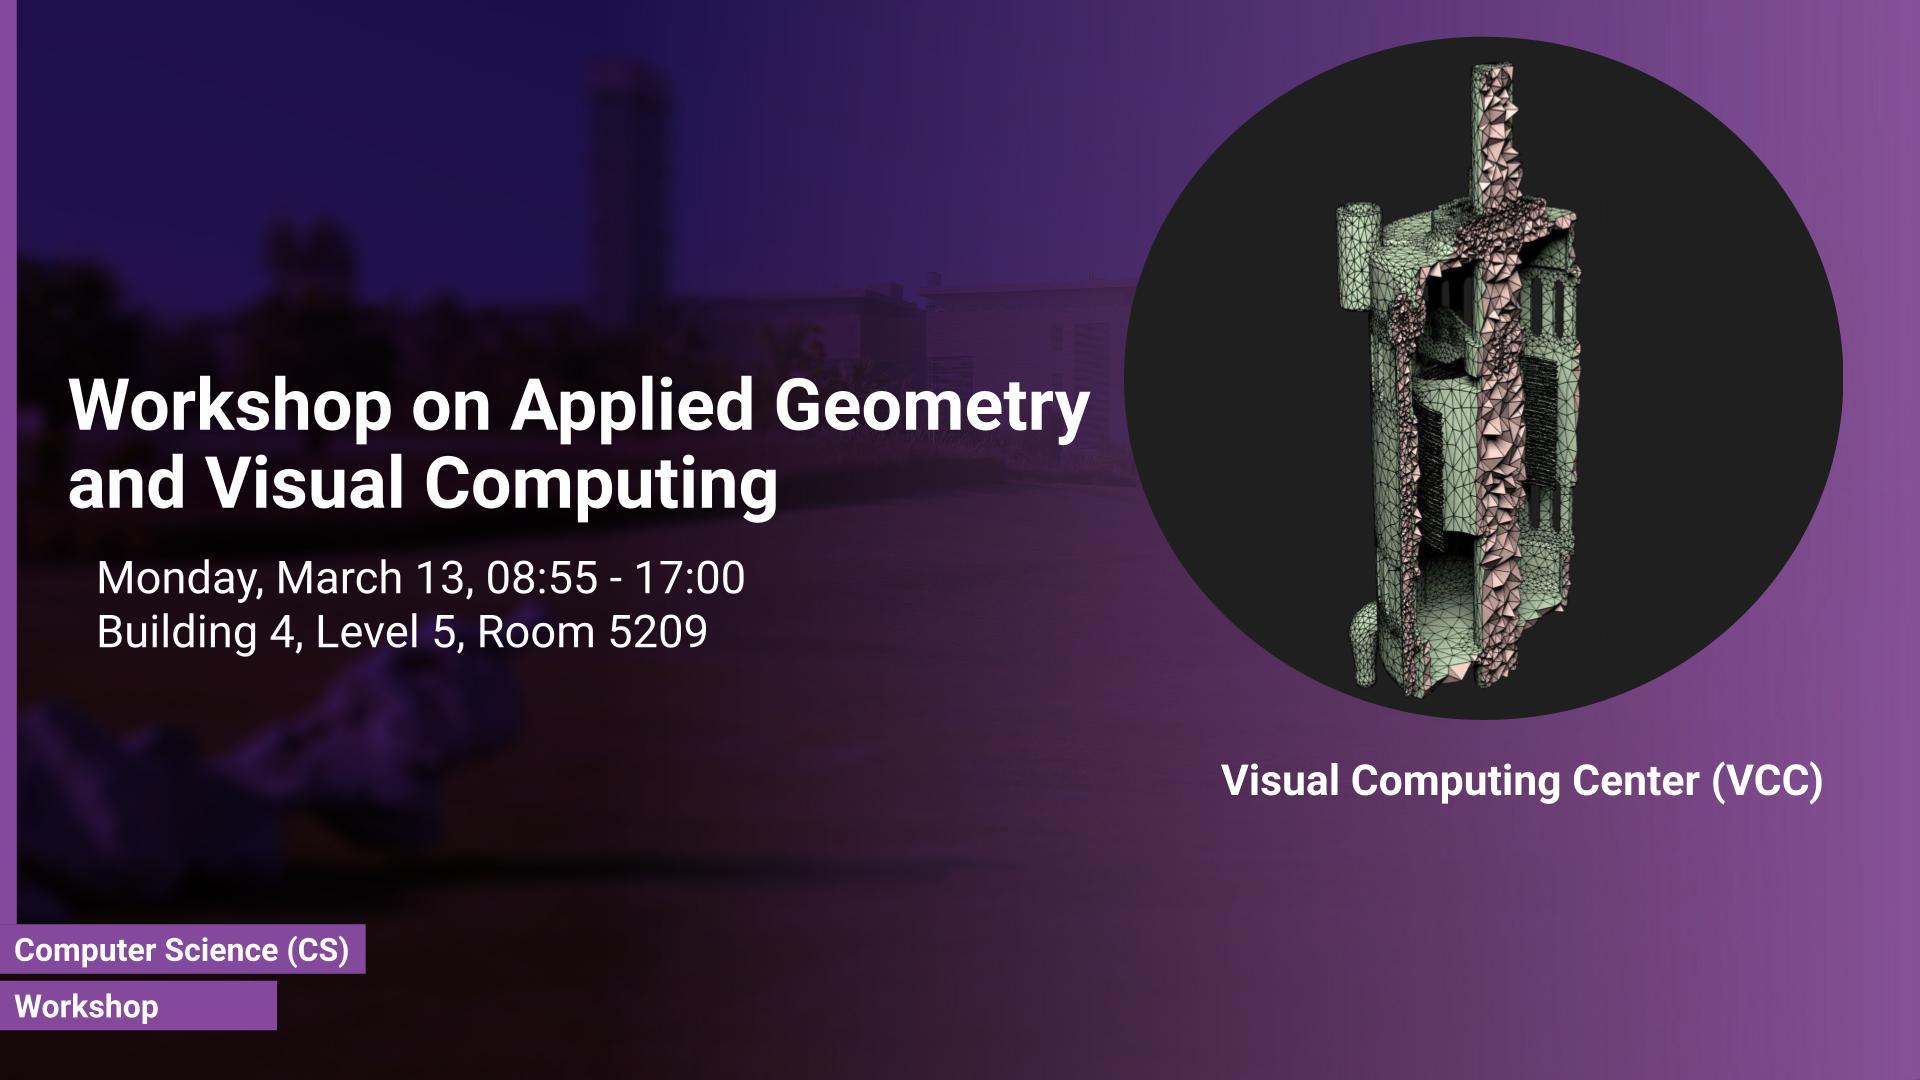 KAUST-CEMSE-CS-VCC-Workshop-on-Applied-Geometry-and-Visual-Computing